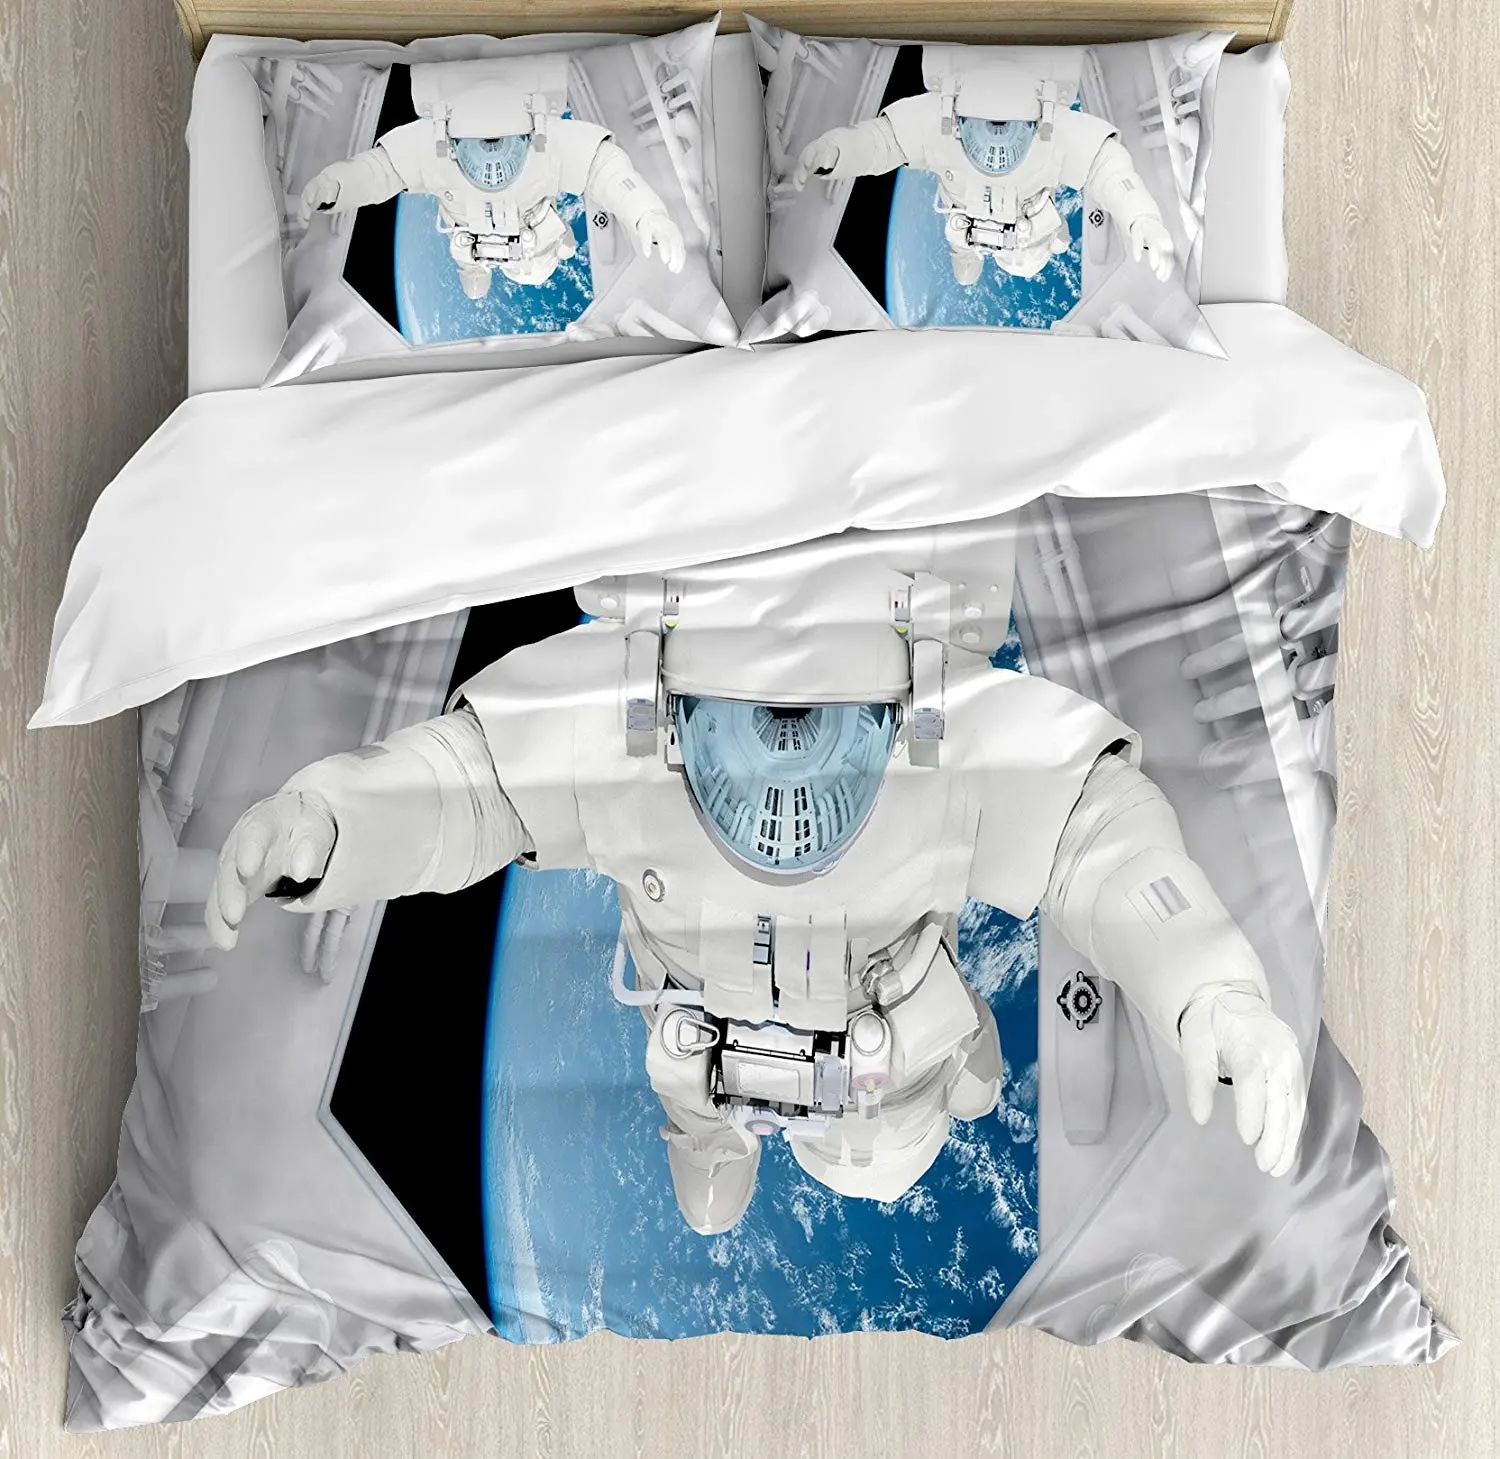 

Outer Space Bedding Set Astronaut inside Spaceship Cosmic Journey Celestial World Universe Duvet Cover Pillowcase For Home